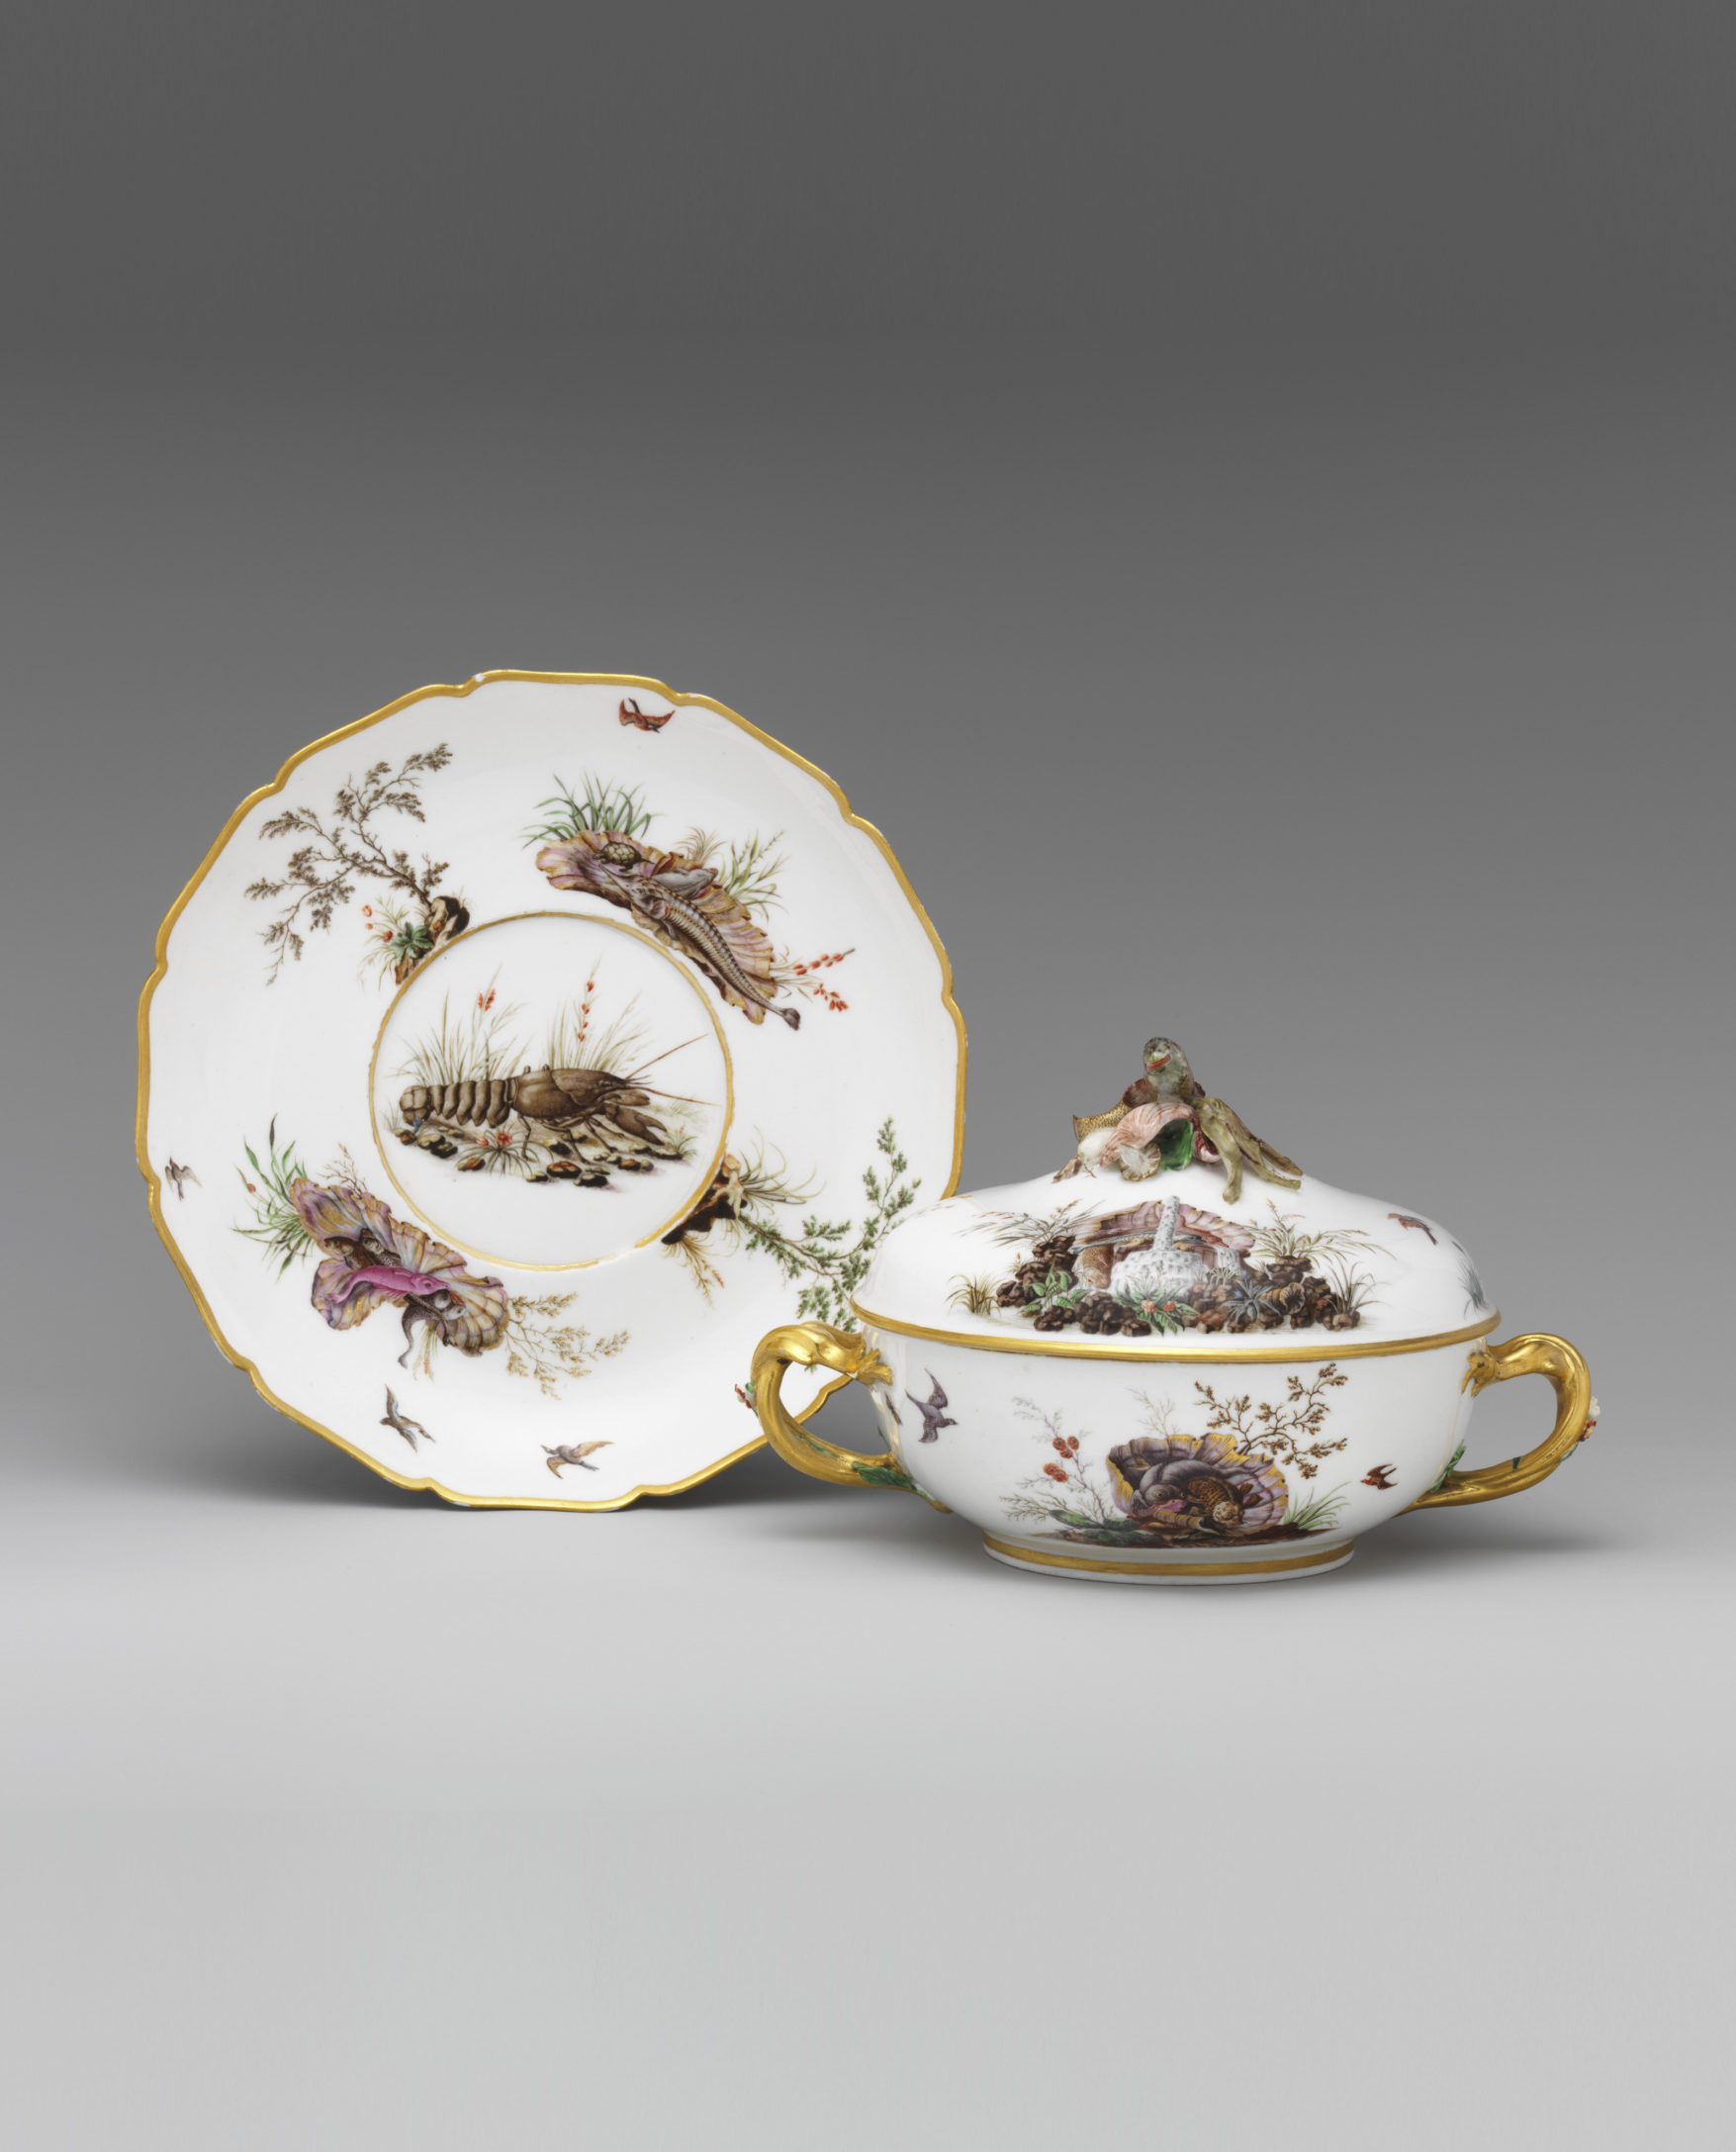 Broth bowl and stand (écuelle ronde et plateau rond), c. 1752-3. (Metropolitan Museum of Art, New York, Inv. no. 50.211.168a, b, .169)
